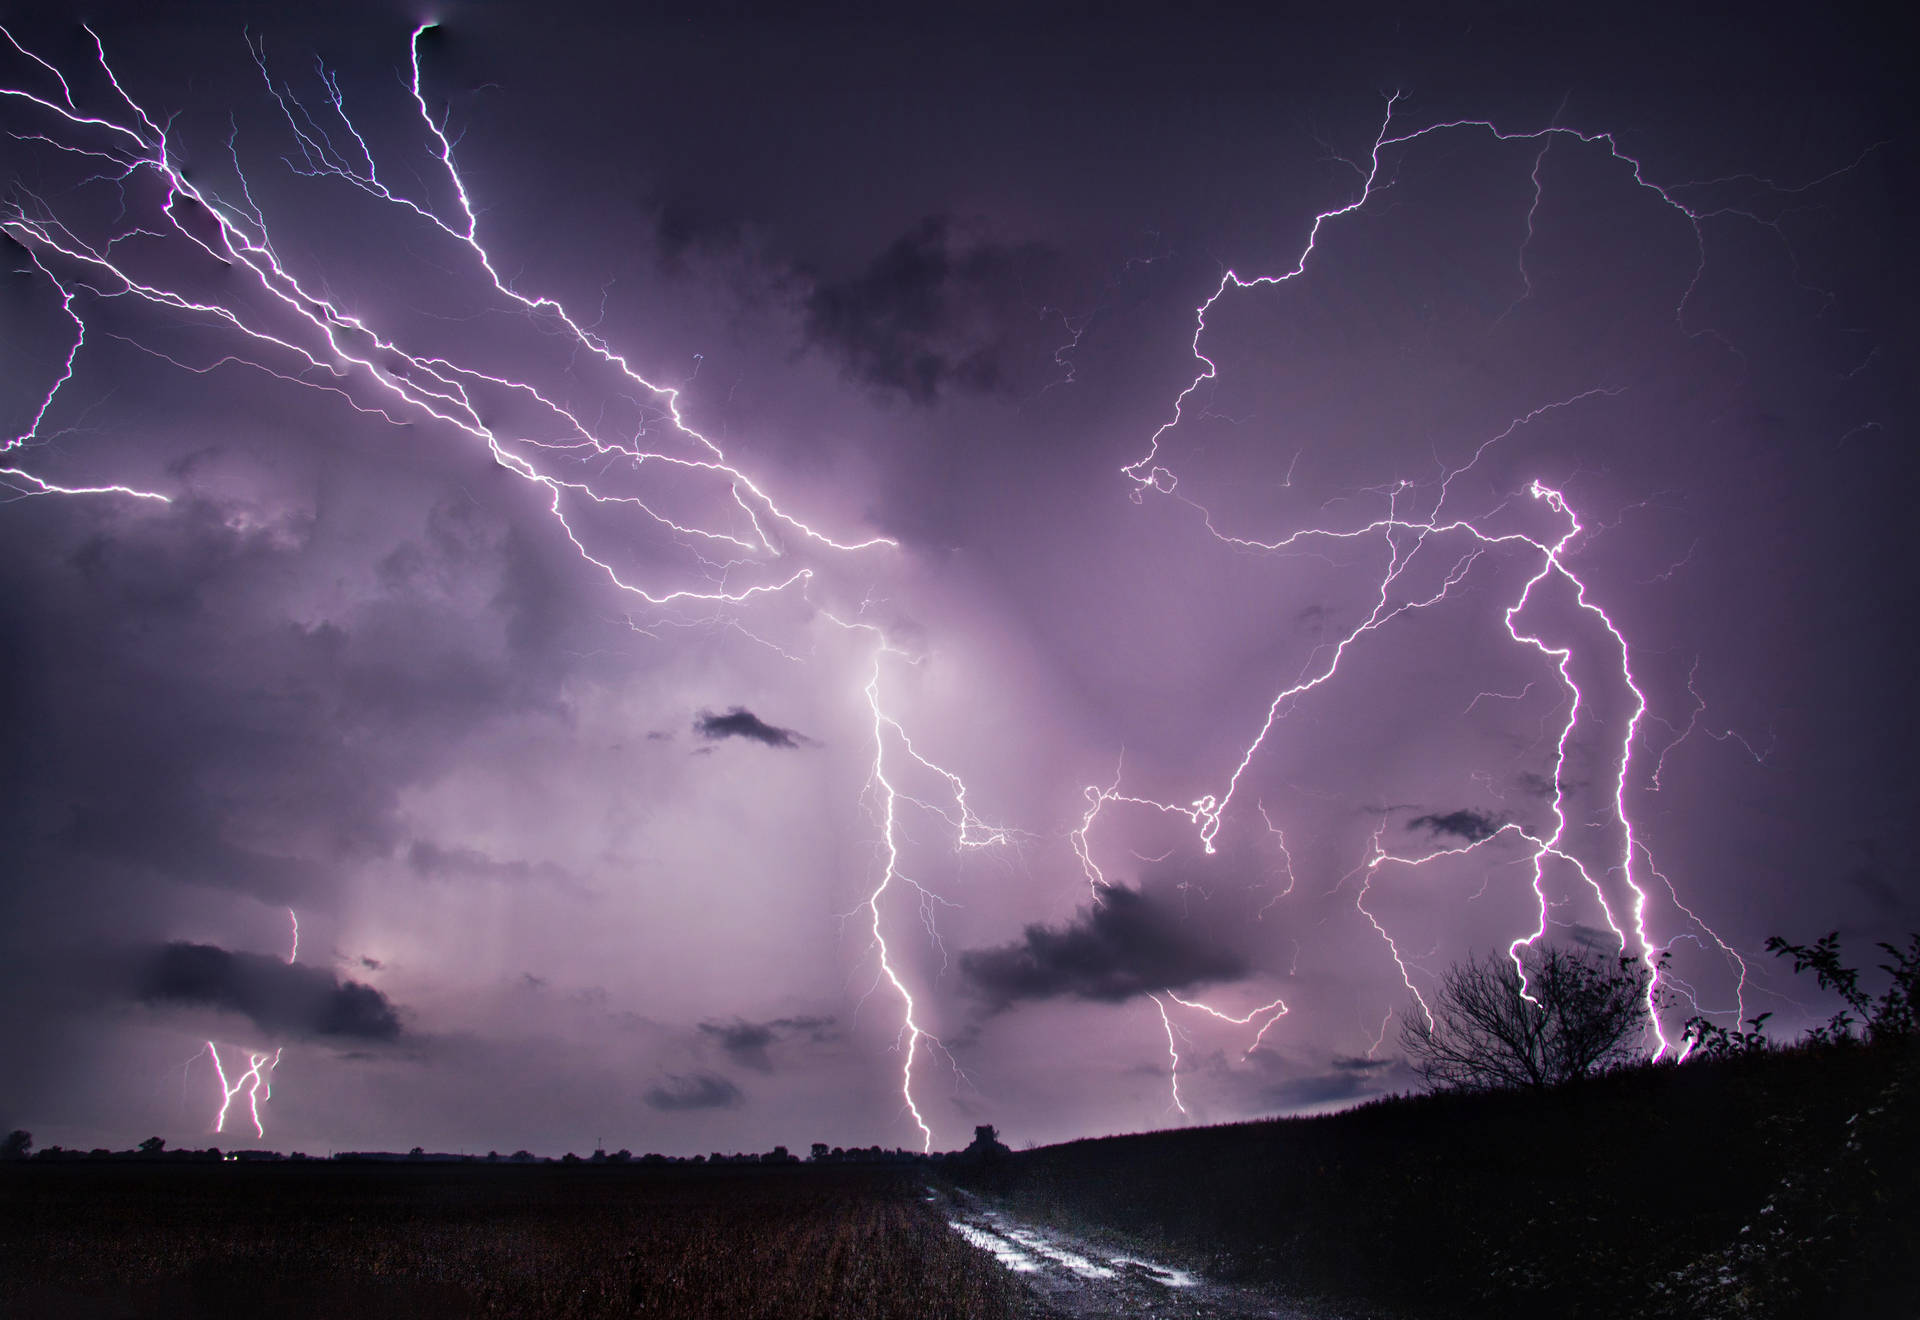 Lightning 5158X3545 Wallpaper and Background Image